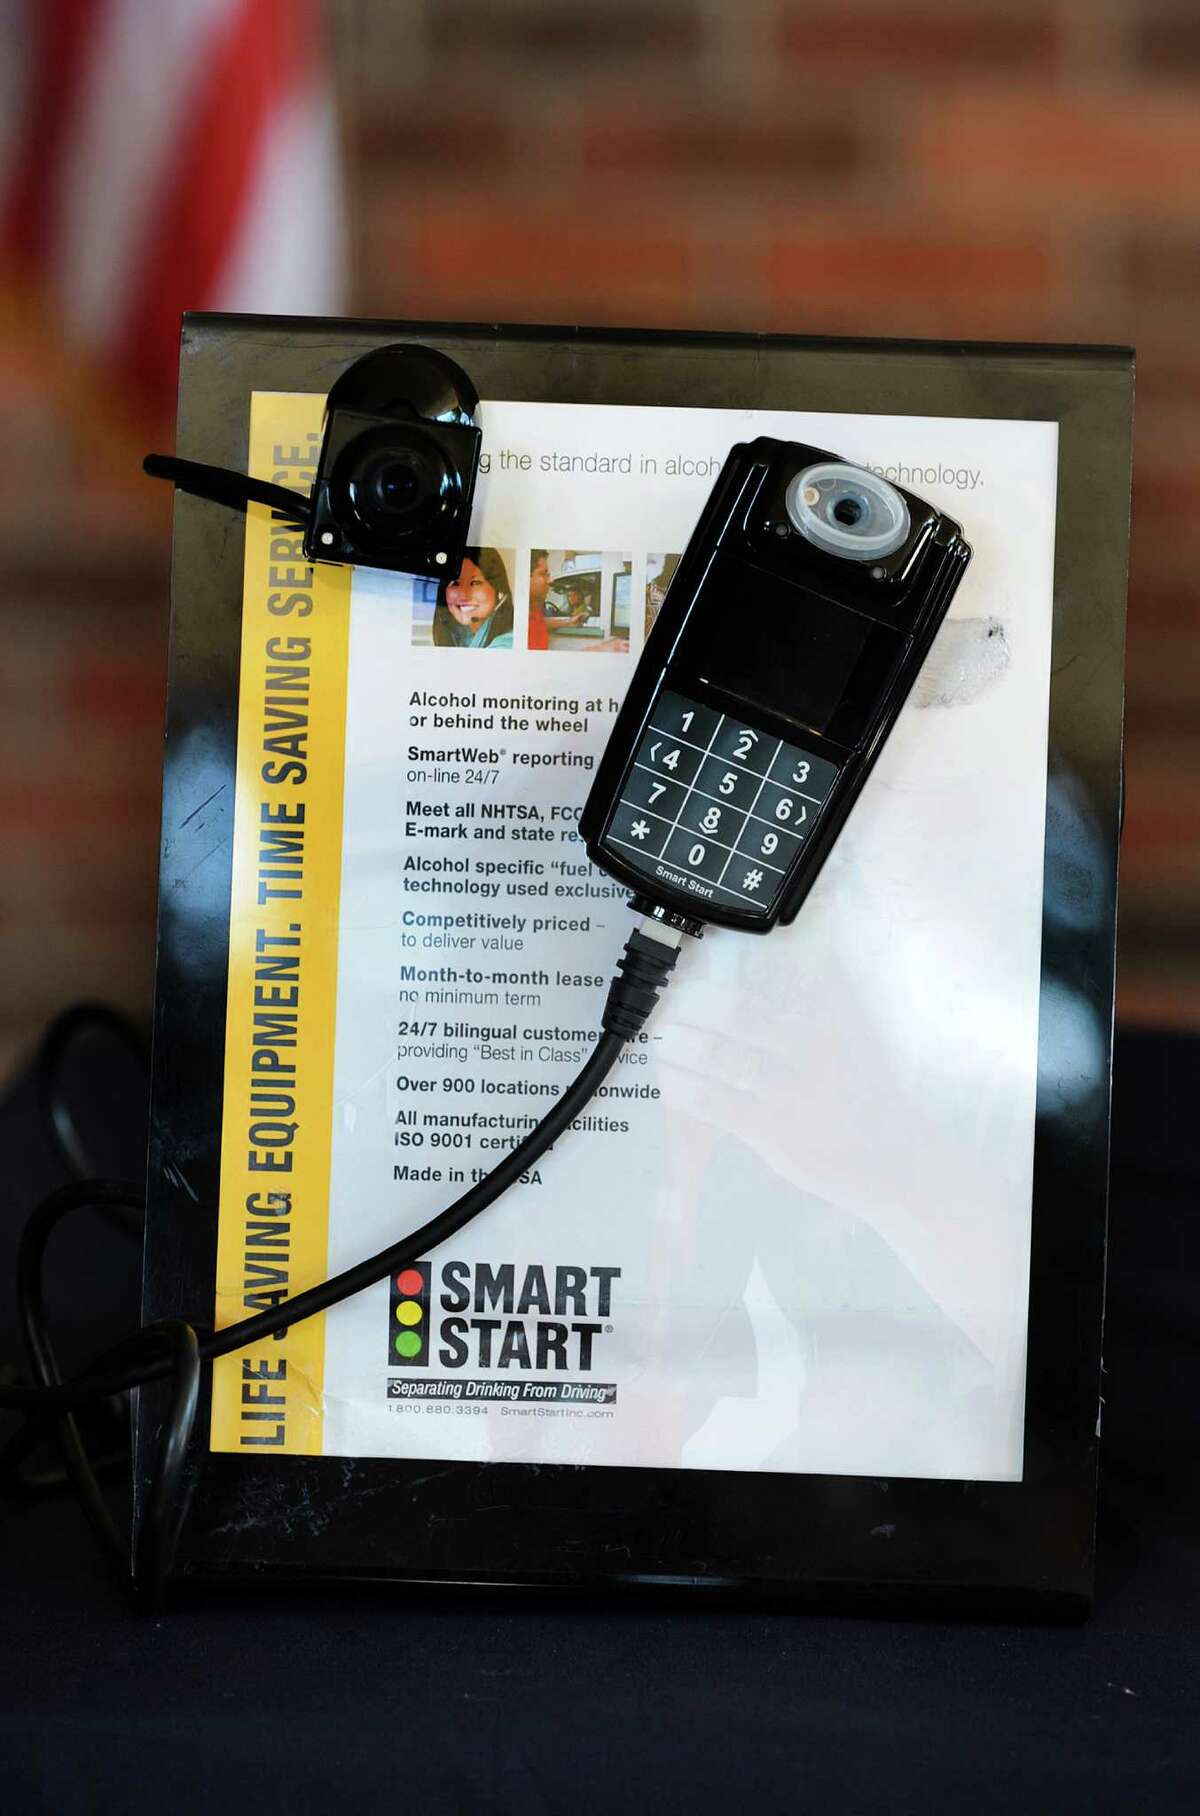 An Ignition Interlock Device that was on display at the ceremony to commemorate the new state law strengthening the state's ignition interlock requirements for driving under the influence (DUI) held at the Fairfield Police Department in Fairfield, Conn. on Monday, Aug. 11, 2014.